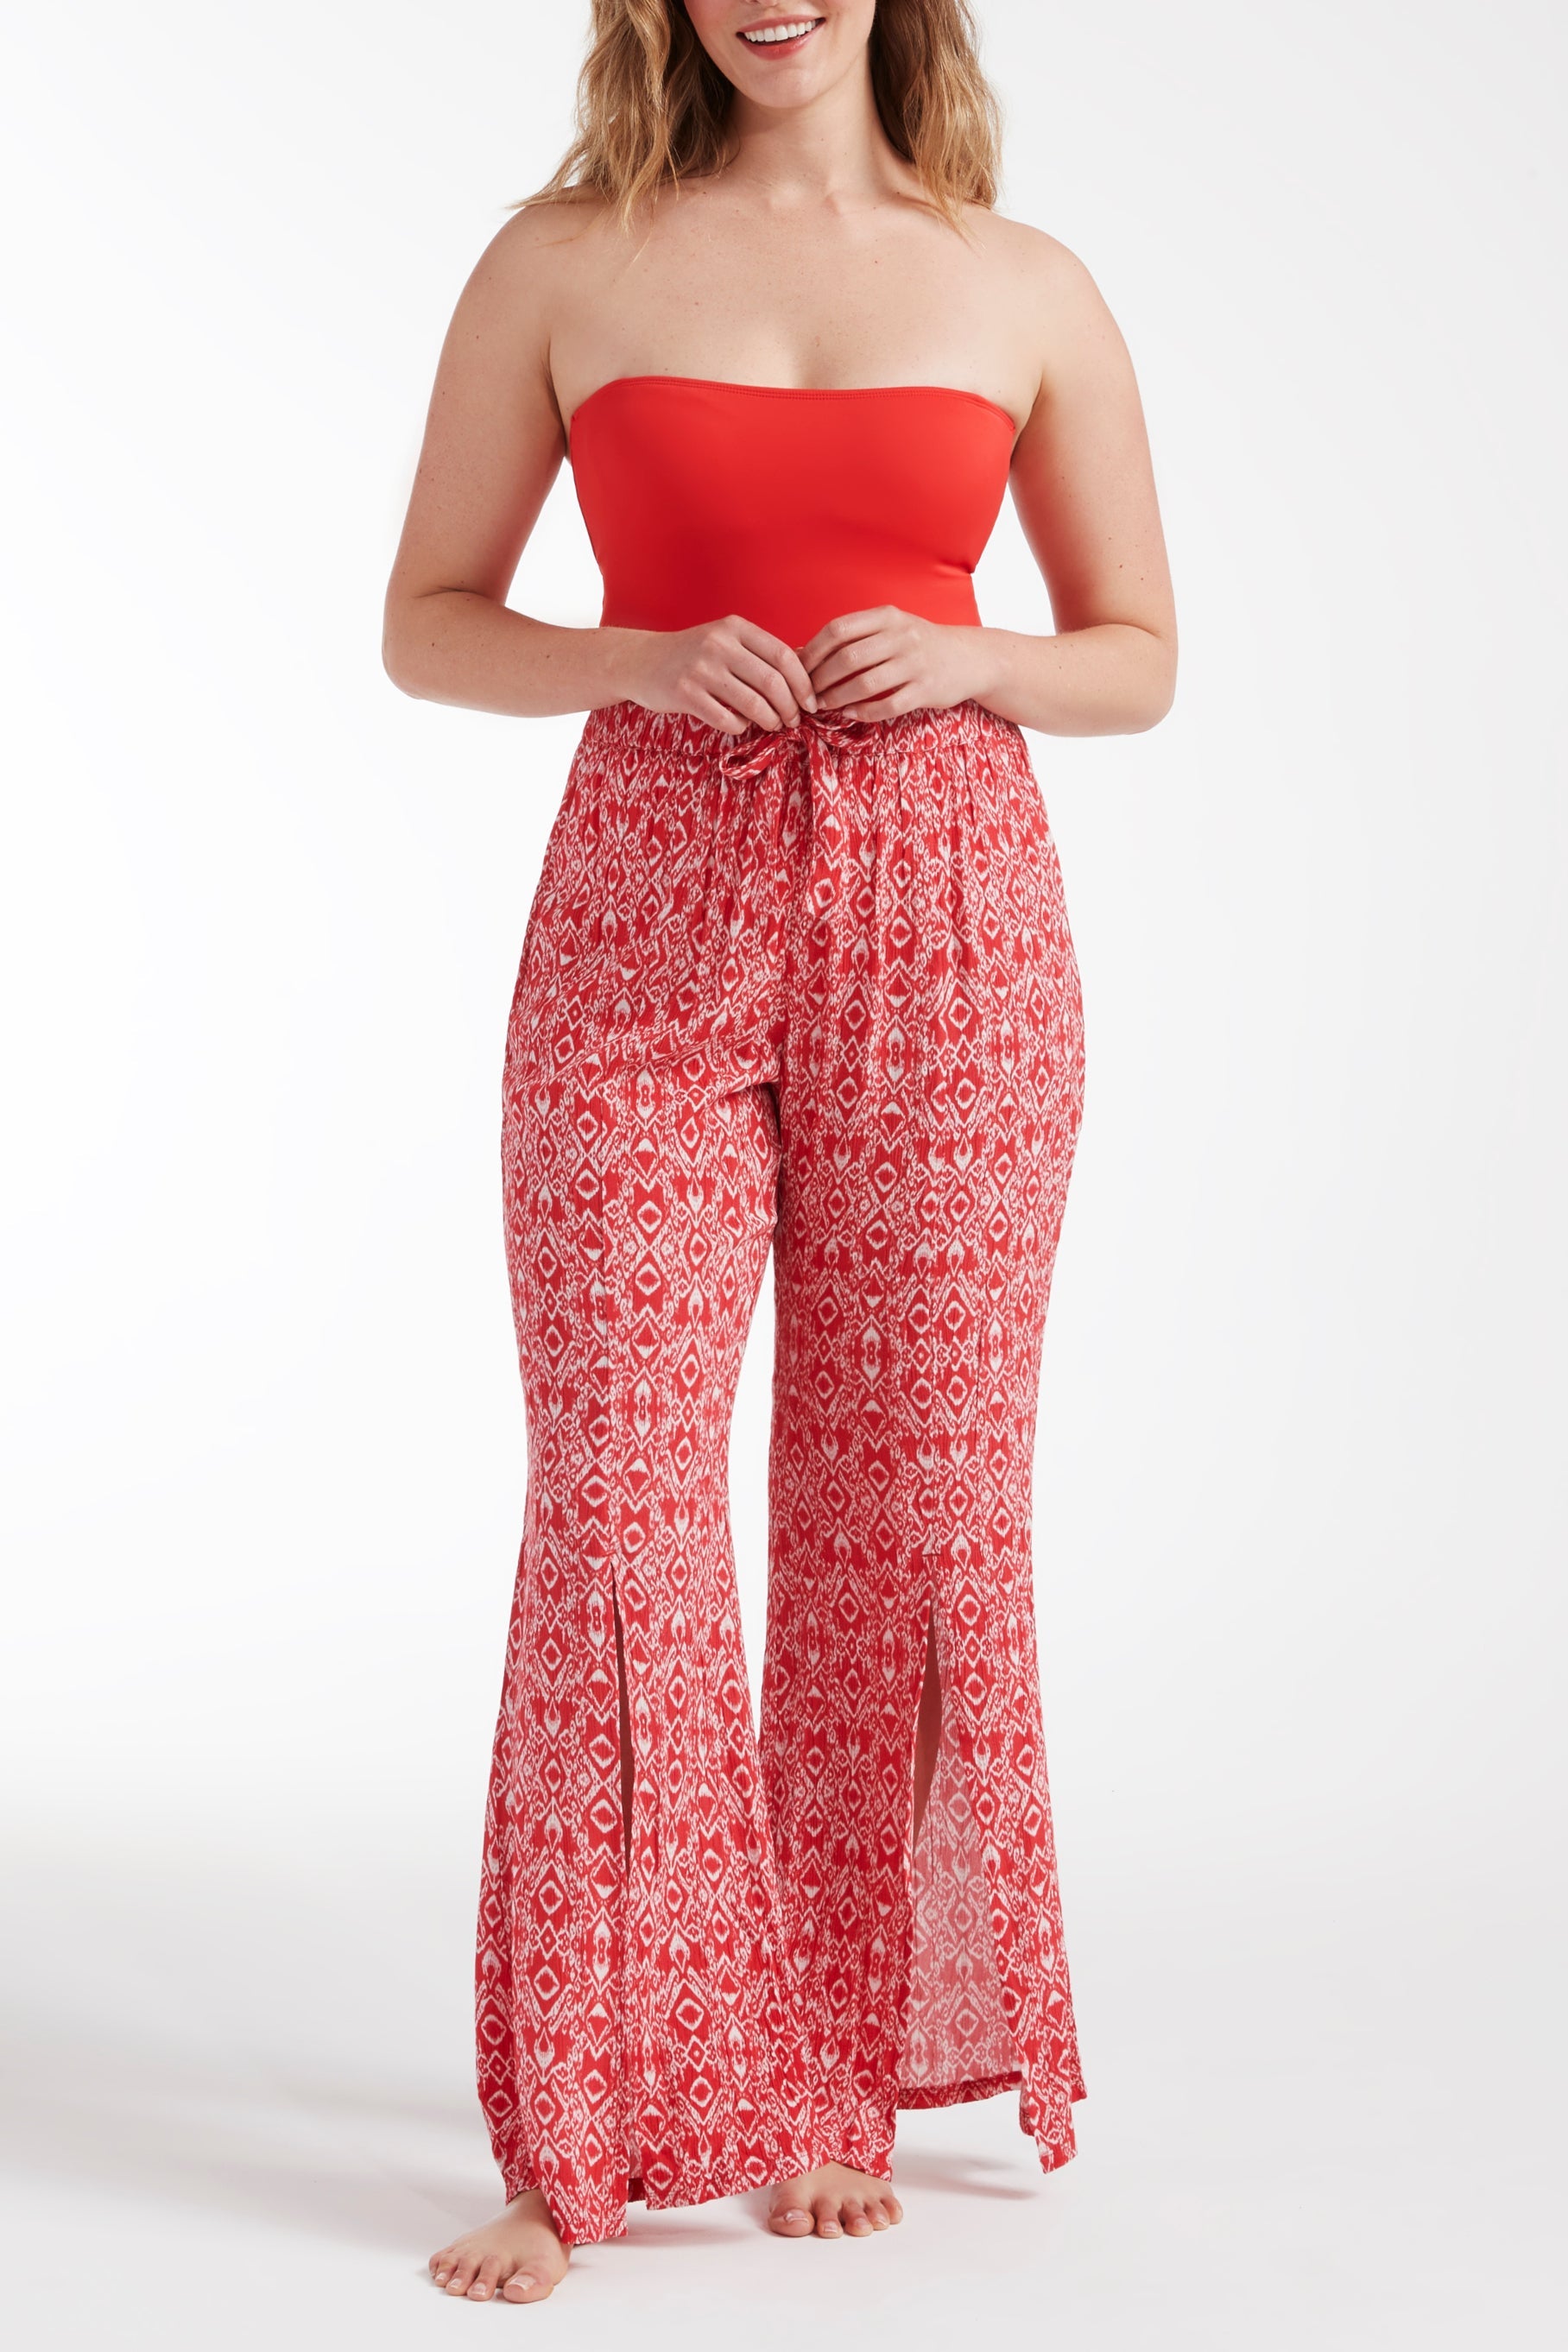 Anne Marie Pants by Hermoza